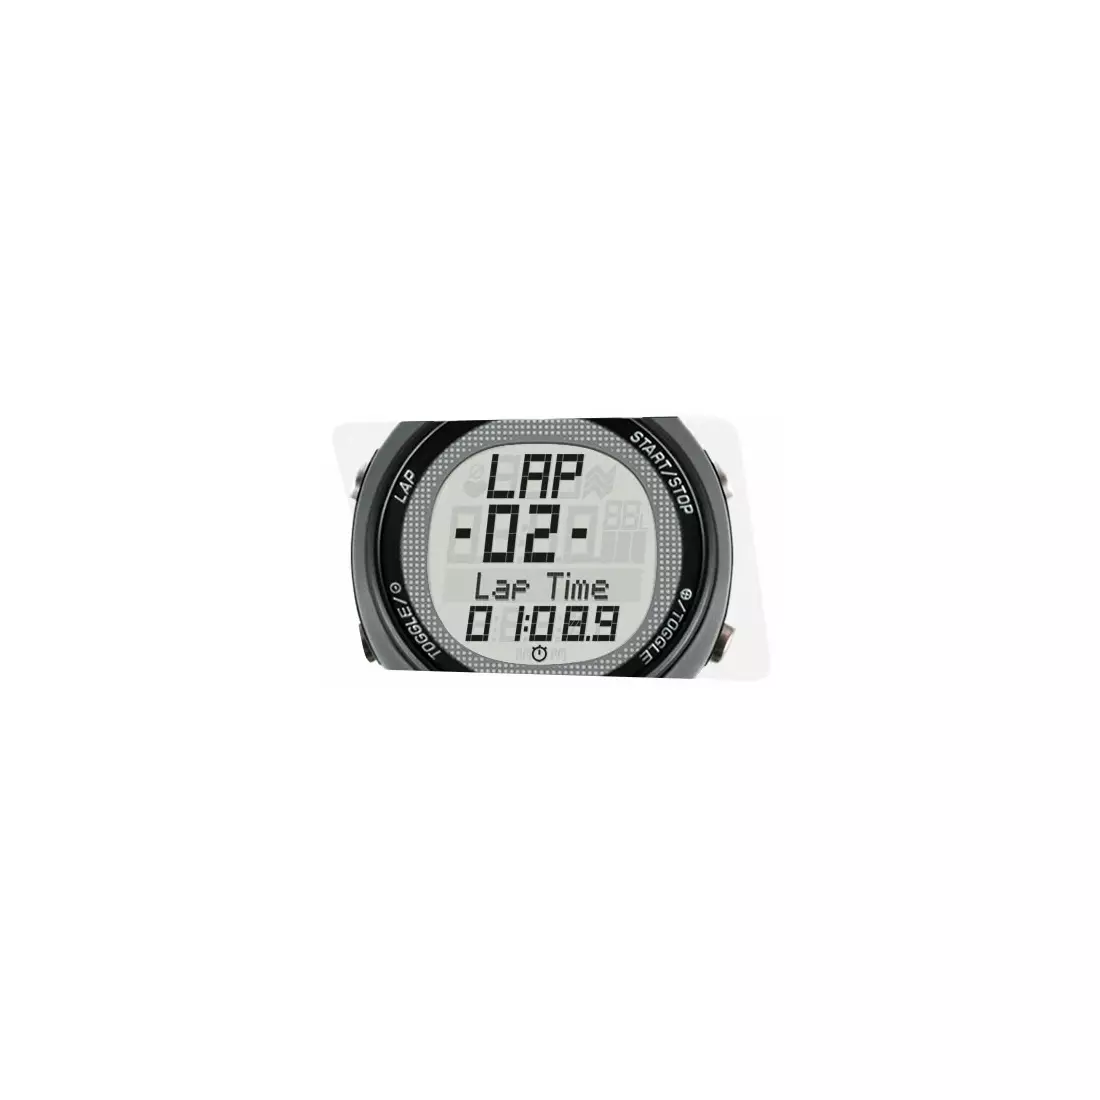 SIGMA 15.11 Heart rate monitor with band, gray